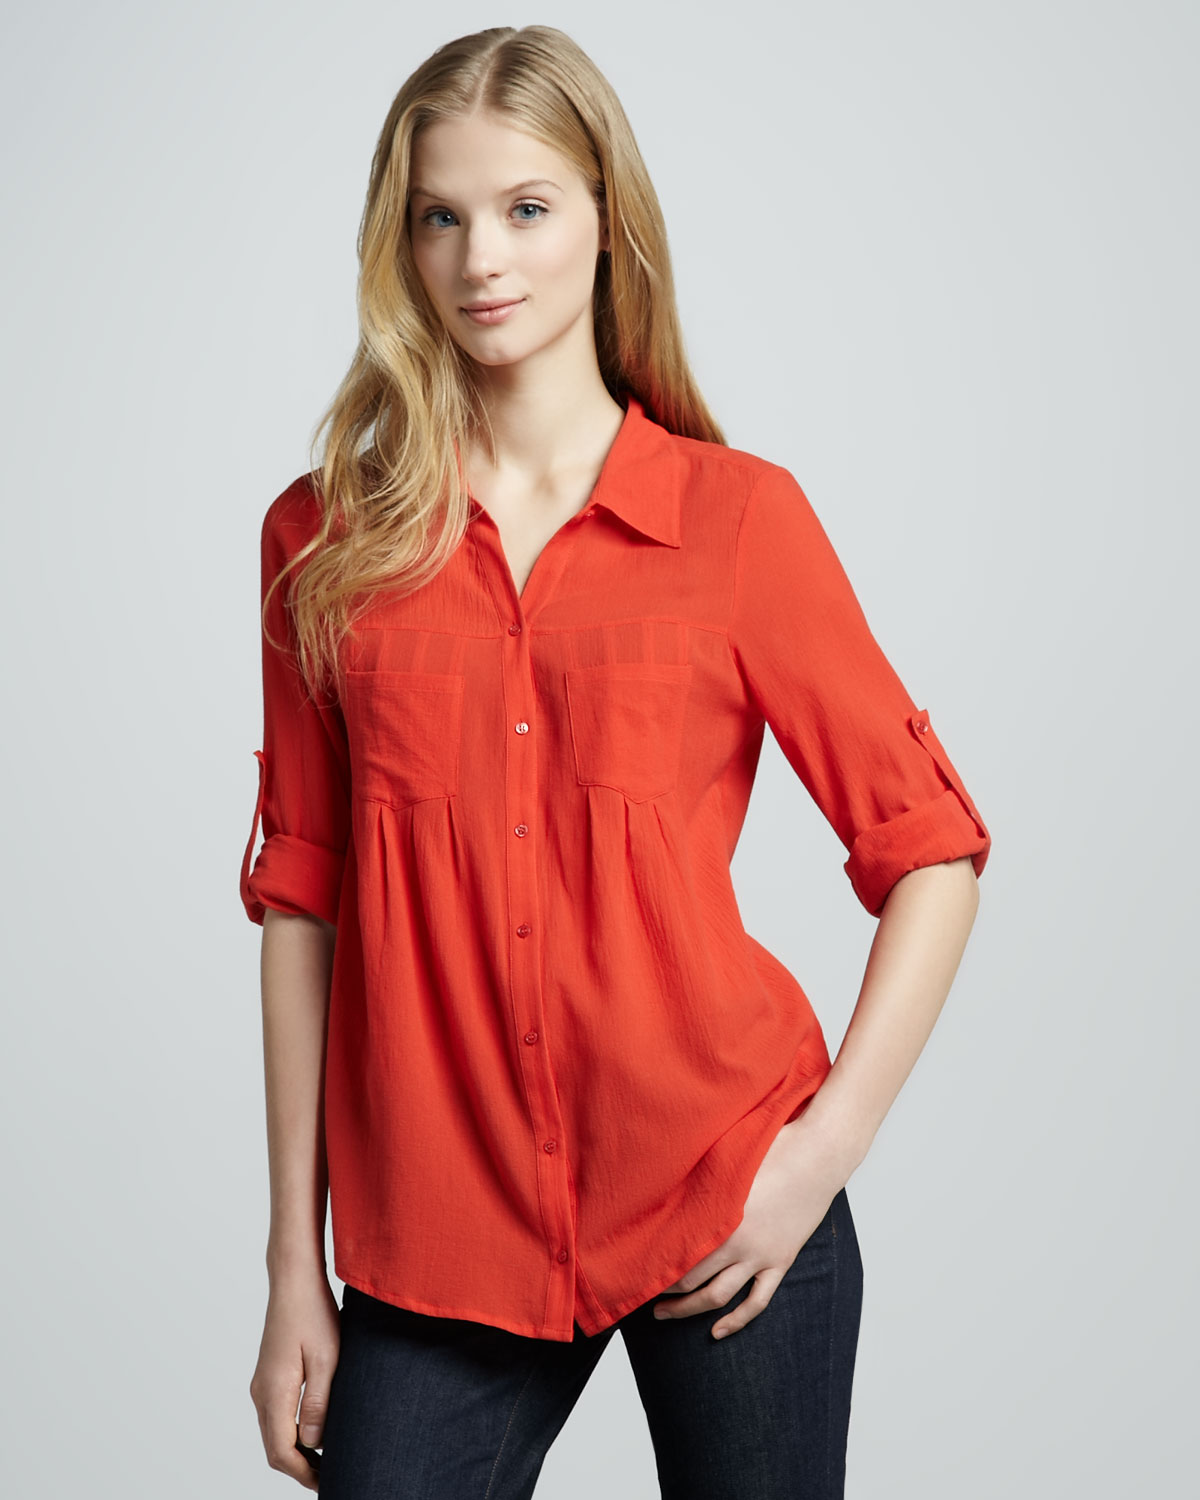 Joie-Pinot-Double-Pocket-Blouse-Cherry